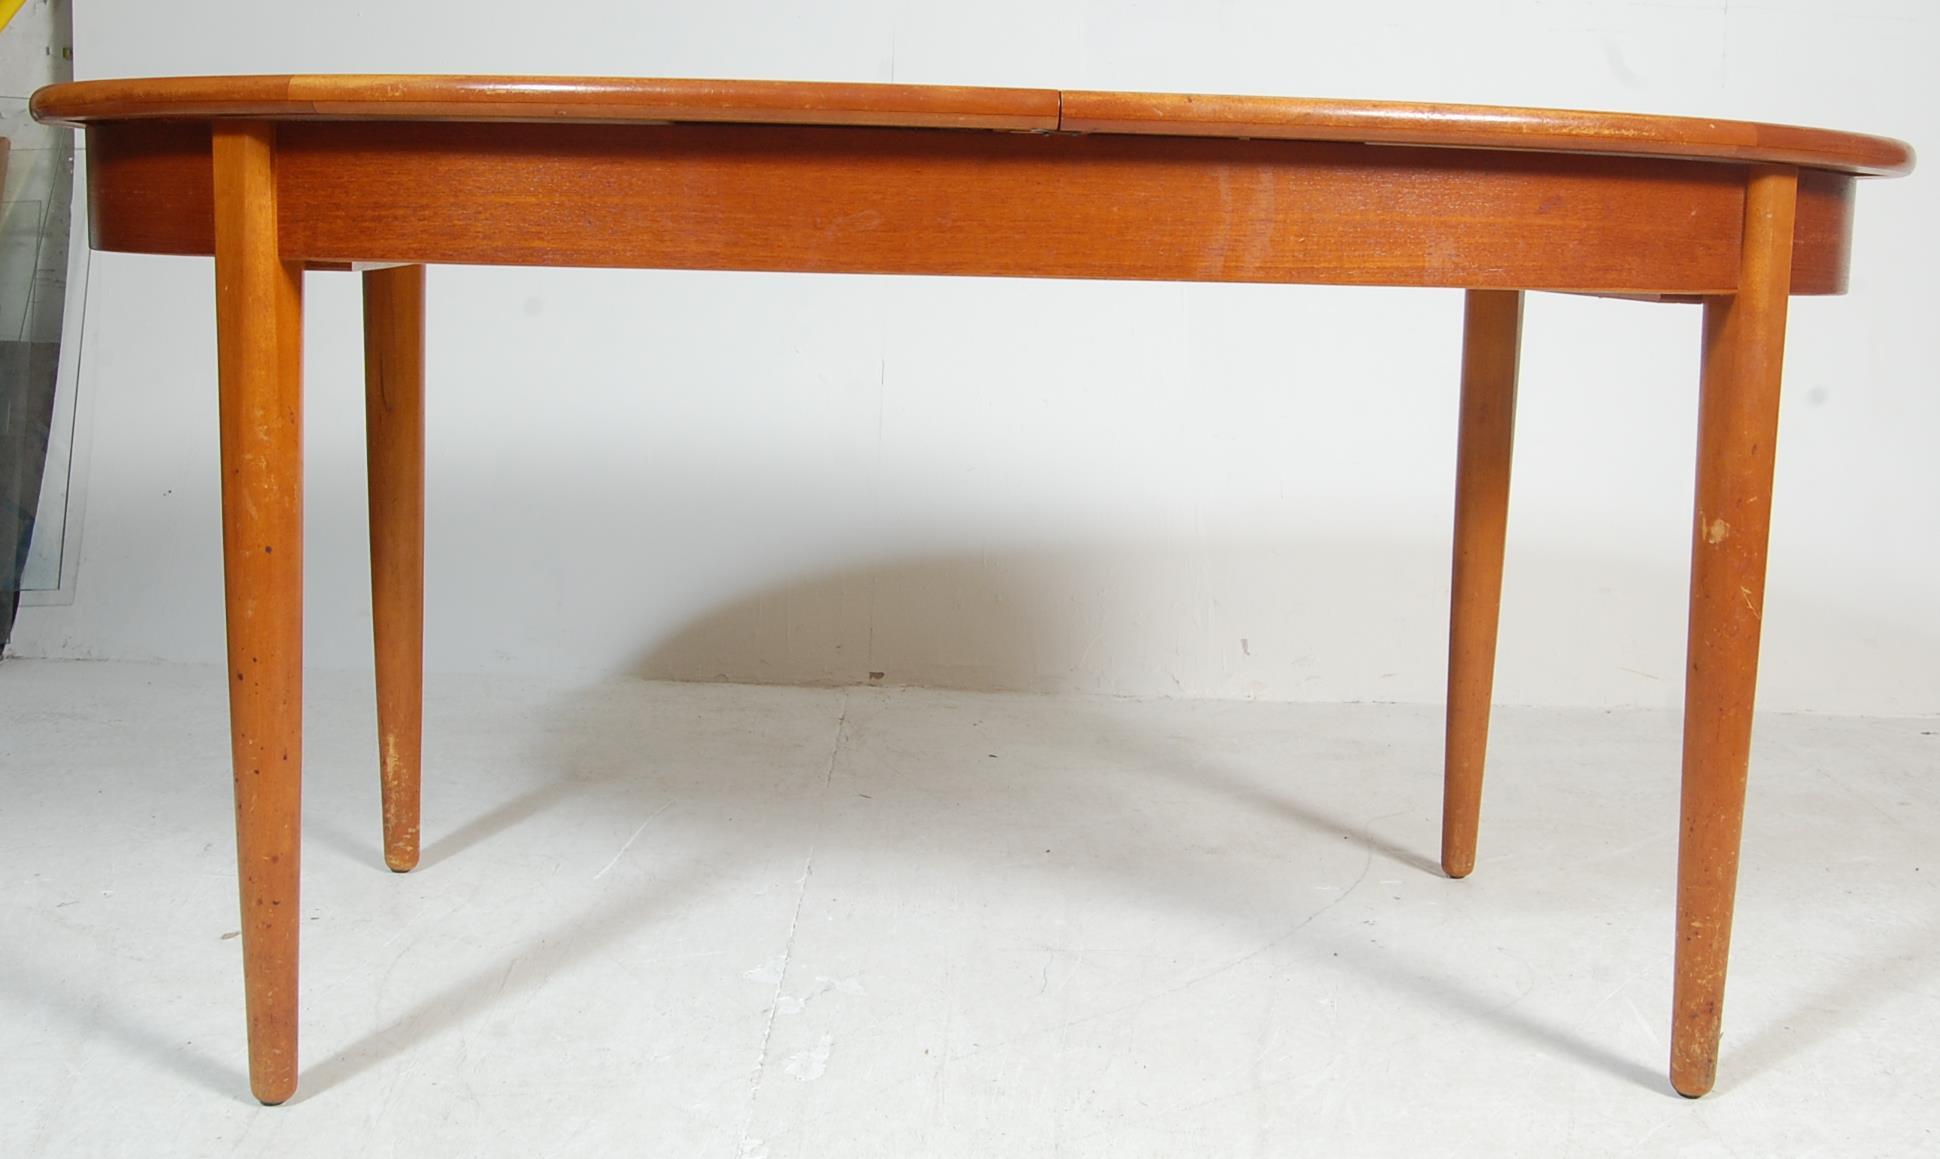 RETRO VINTAGE 1970S EXTENDABLE TEAK DINING TABLE - Image 5 of 6